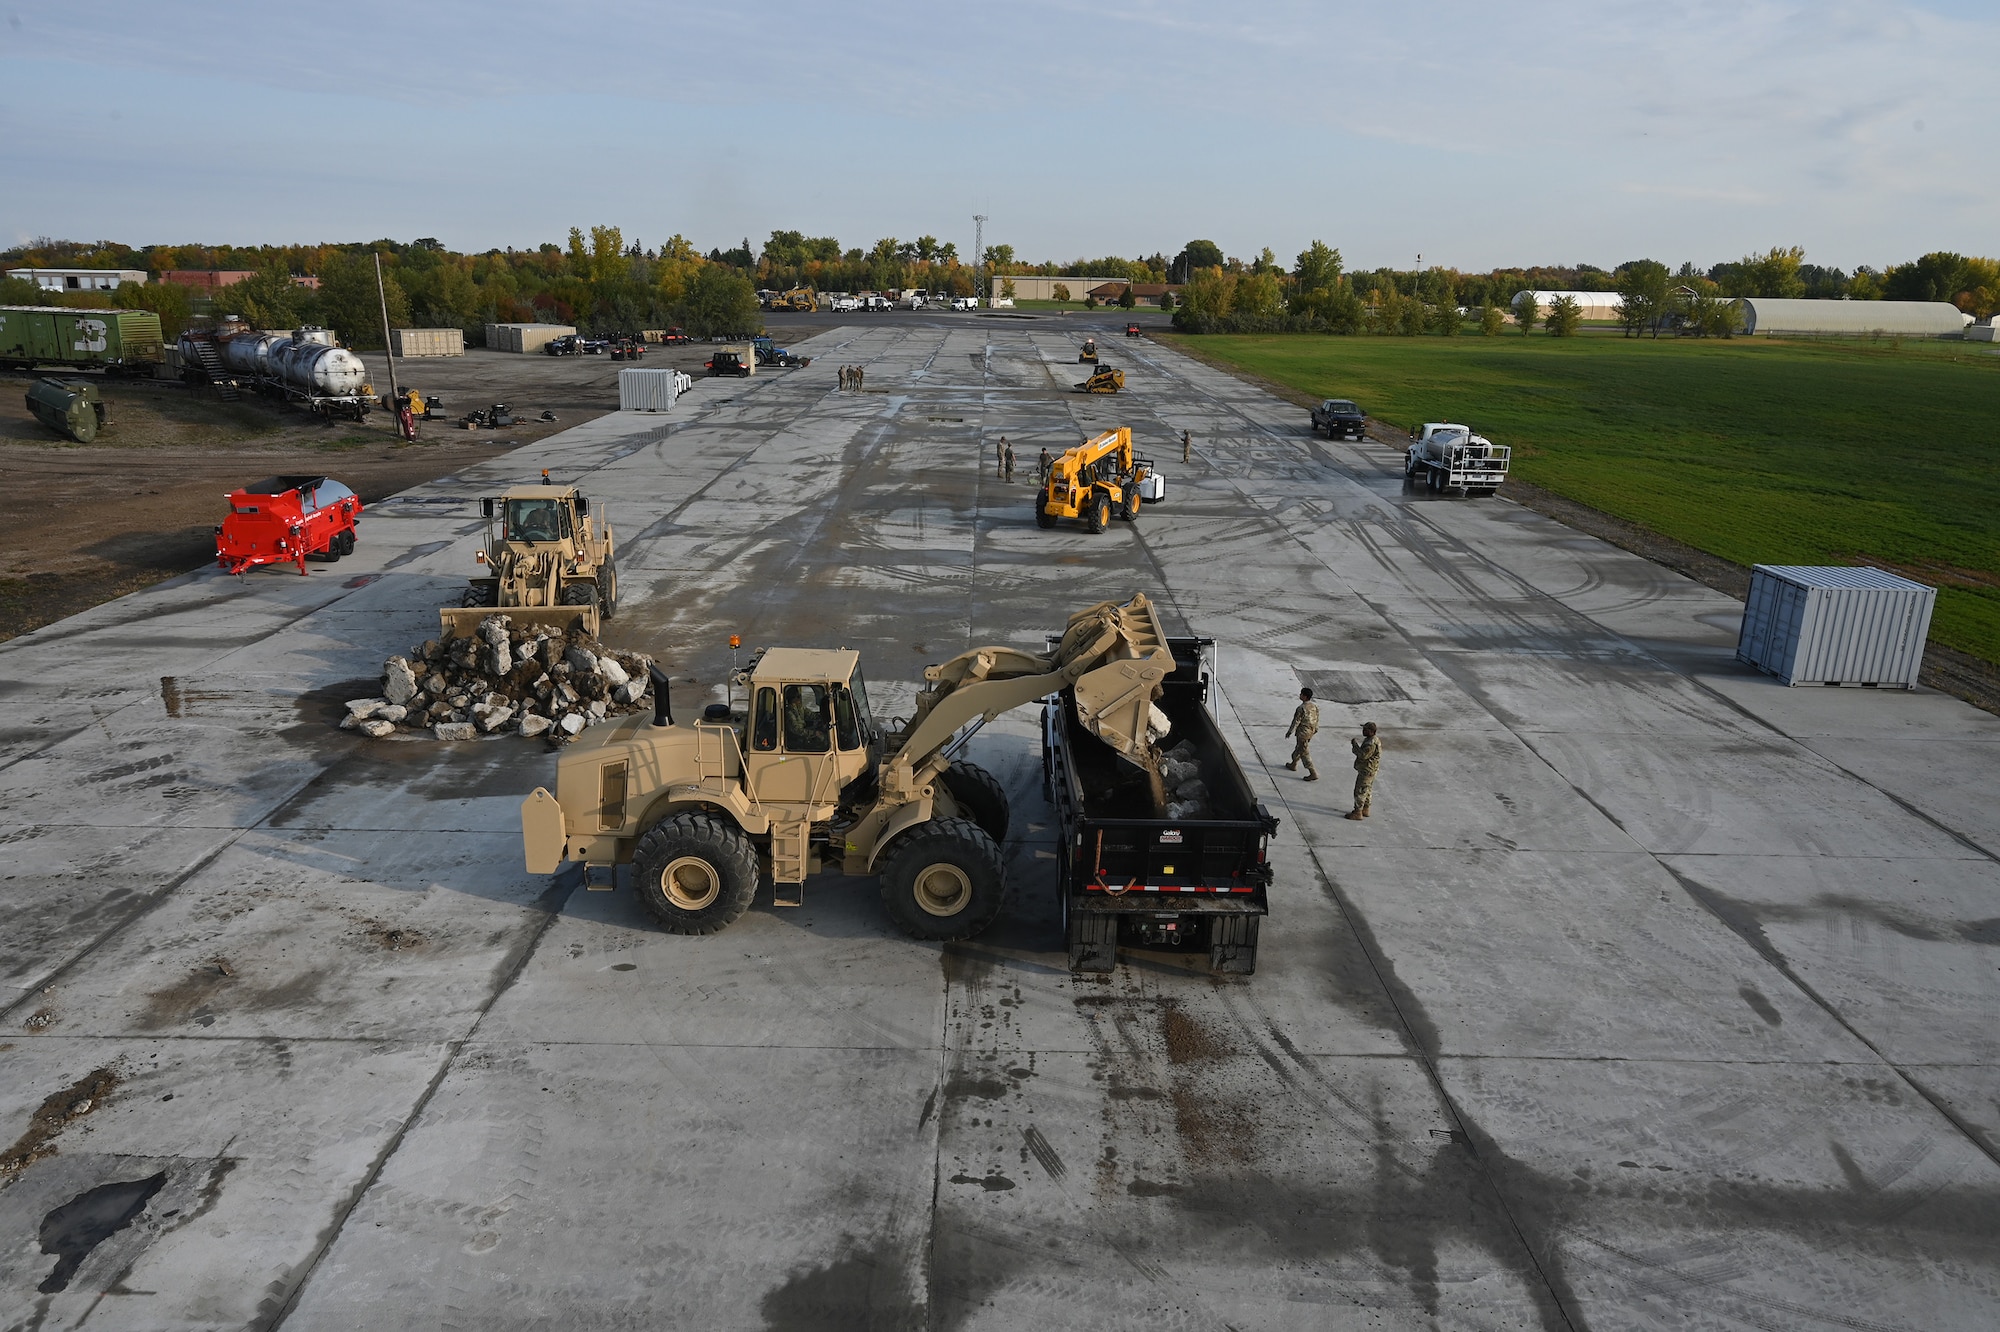 Heavy equipment and military personnel can be seen patch square holes on a concrete training runway from an elevated view at the North Dakota Air National Guard Regional Training Site, Fargo, N.D., Sept. 30, 2021.